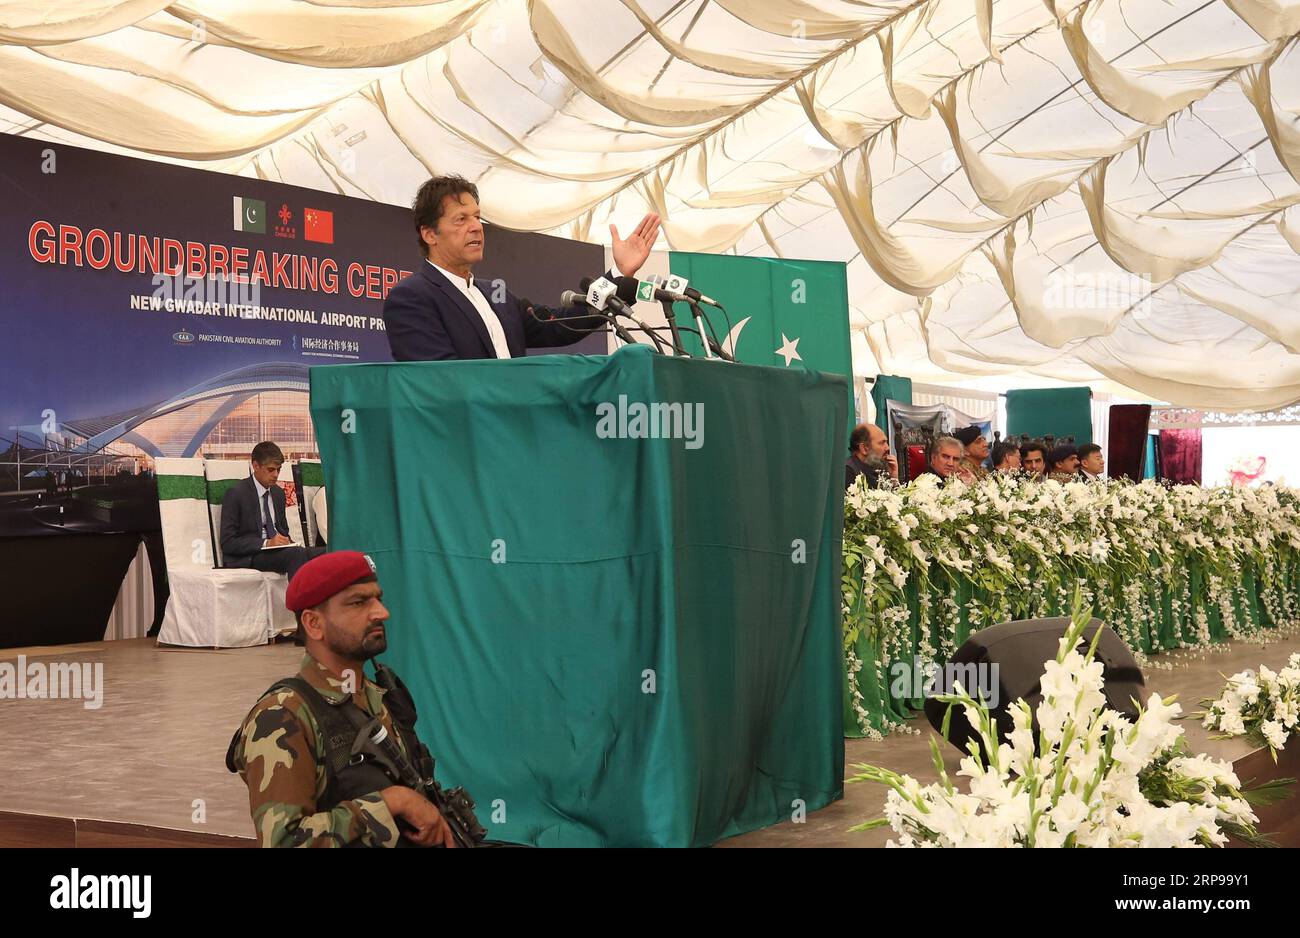 (190330) -- GWADAR, March 30, 2019 (Xinhua) -- Pakistani Prime Minister Imran Khan addresses the ground breaking ceremony of the new Gwadar International Airport Project in Gwadar, Pakistan, on March 29, 2019. Pakistan broke ground for the construction of the China-funded new Gwadar International Airport on Friday, which would link Pakistan s fast-rising southwest Gwadar port city with the rest of the world. (Xinhua/Liu Tian) PAKISTAN-GWADAR-AIRPORT-GROUND BREAKING CEREMONY PUBLICATIONxNOTxINxCHN Stock Photo